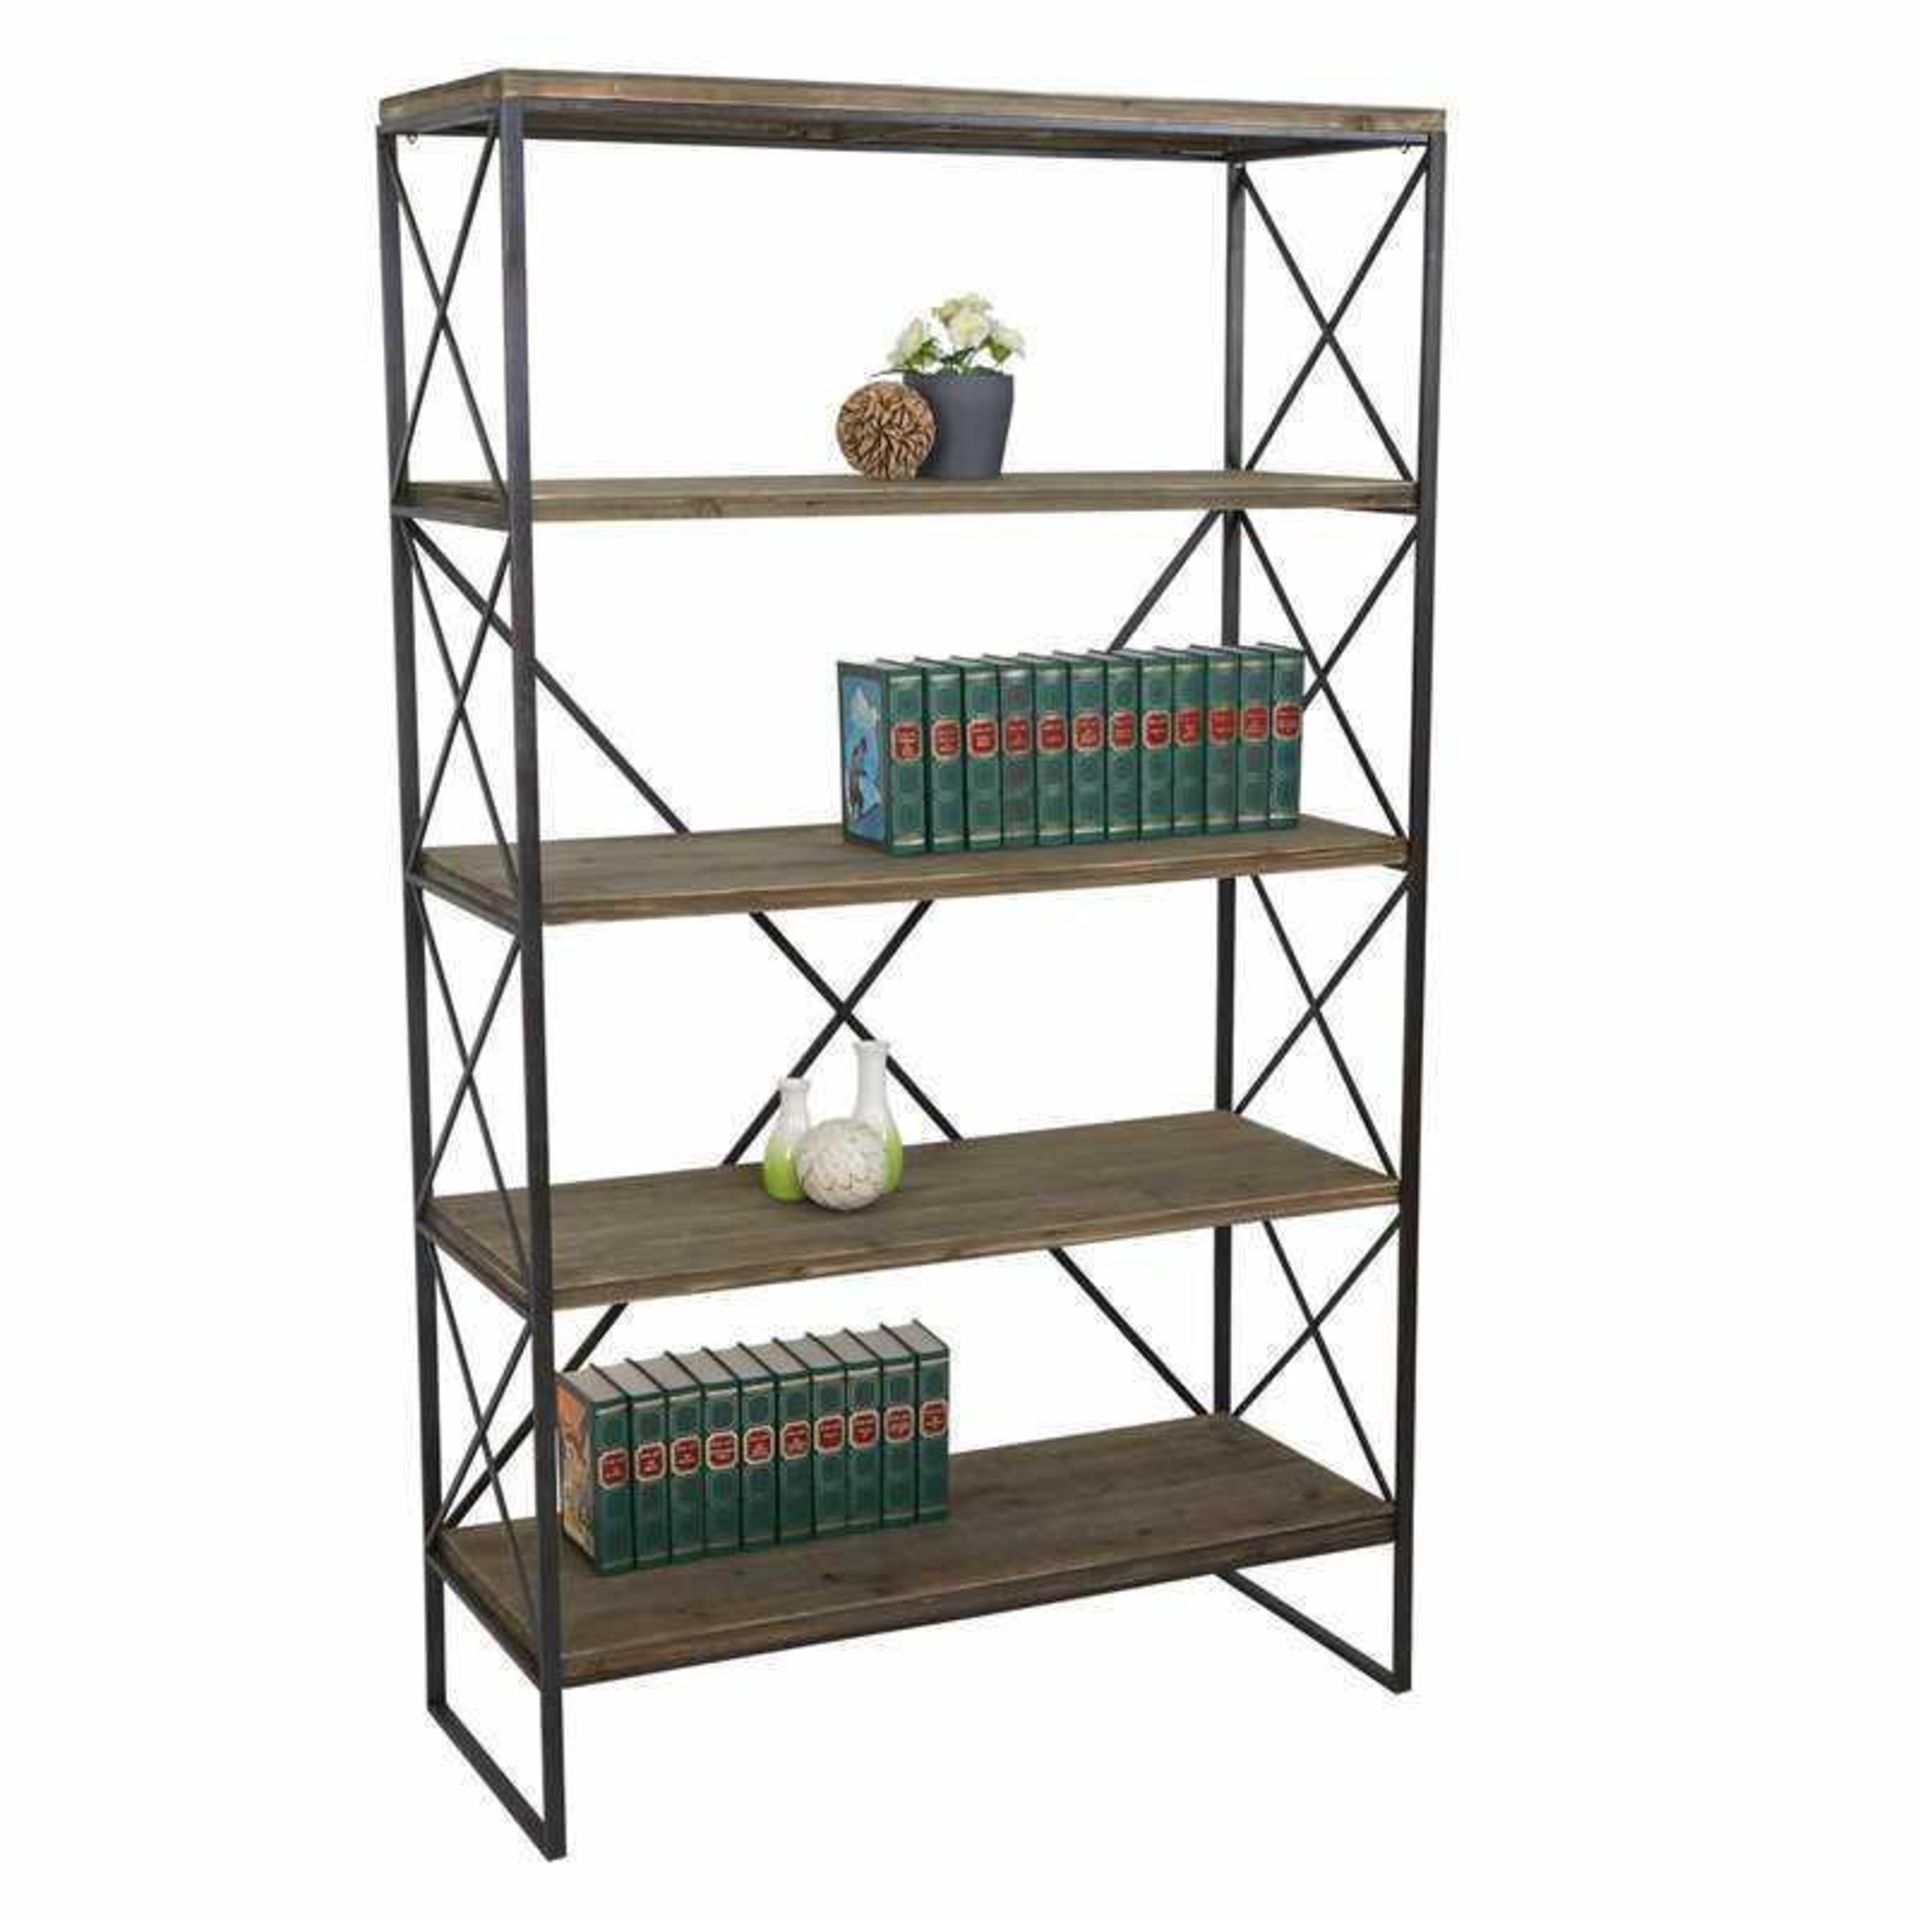 Boxed Borough Wharf Hobort Bookcase RRP £145 (18993)(Appraisals Available On Request) (Pictures